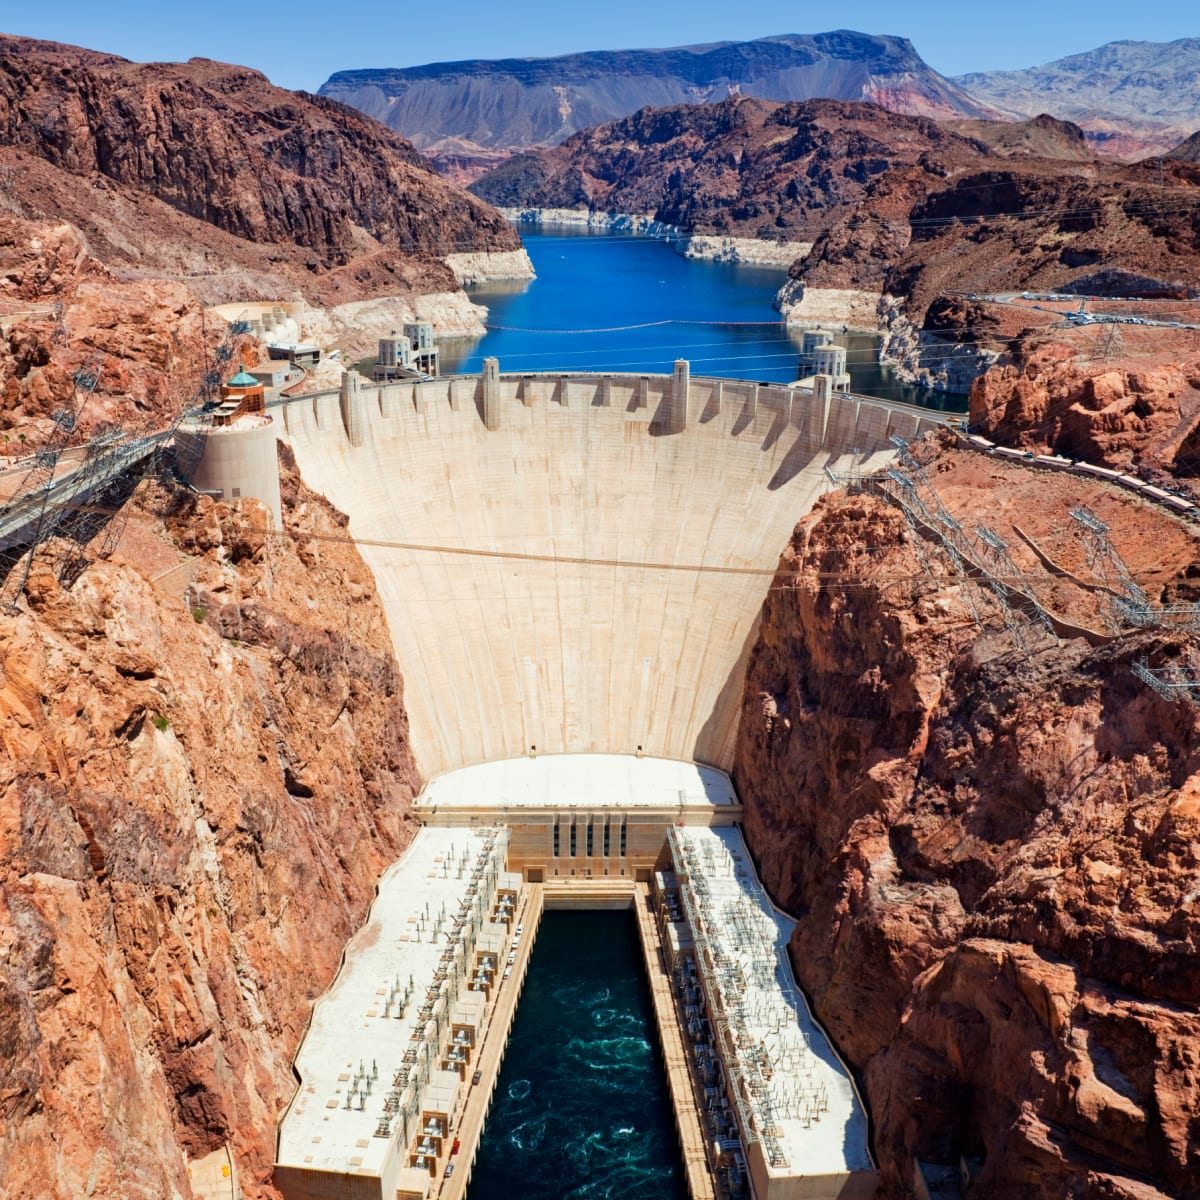 A photo of the Hoover Dam showing different water layers